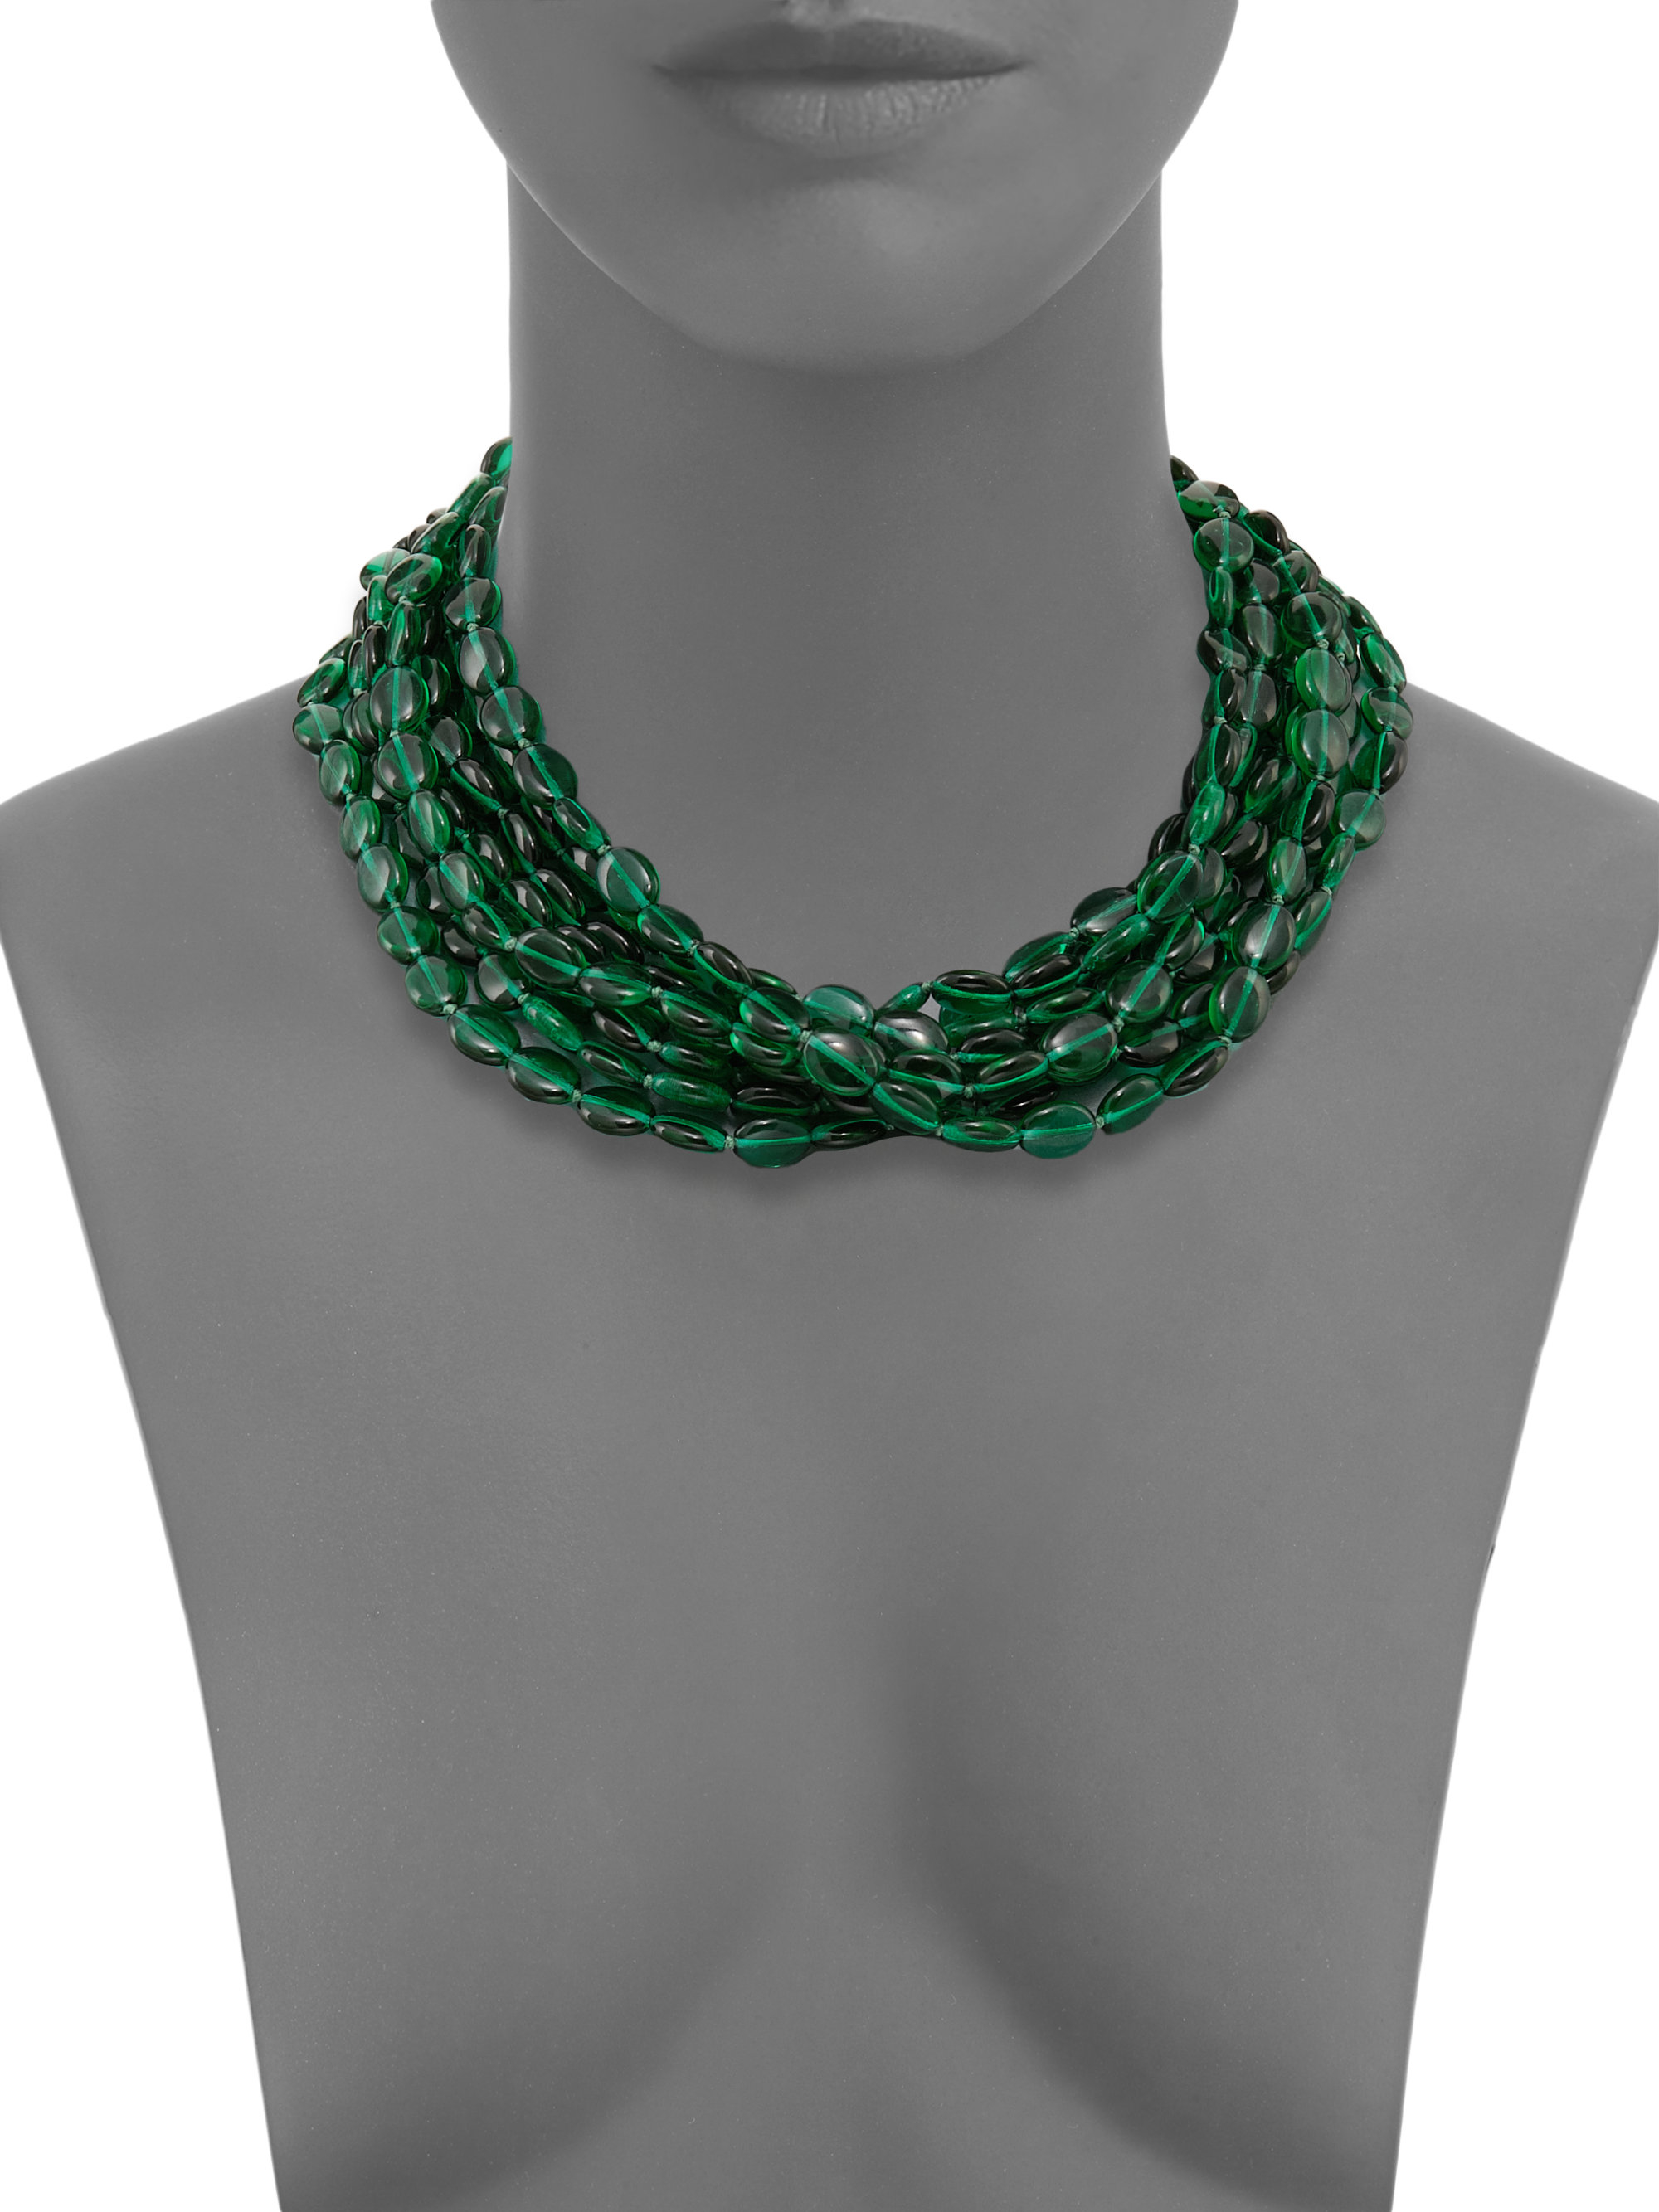 Kenneth jay lane Multi Strand Beaded Necklace in Green | Lyst